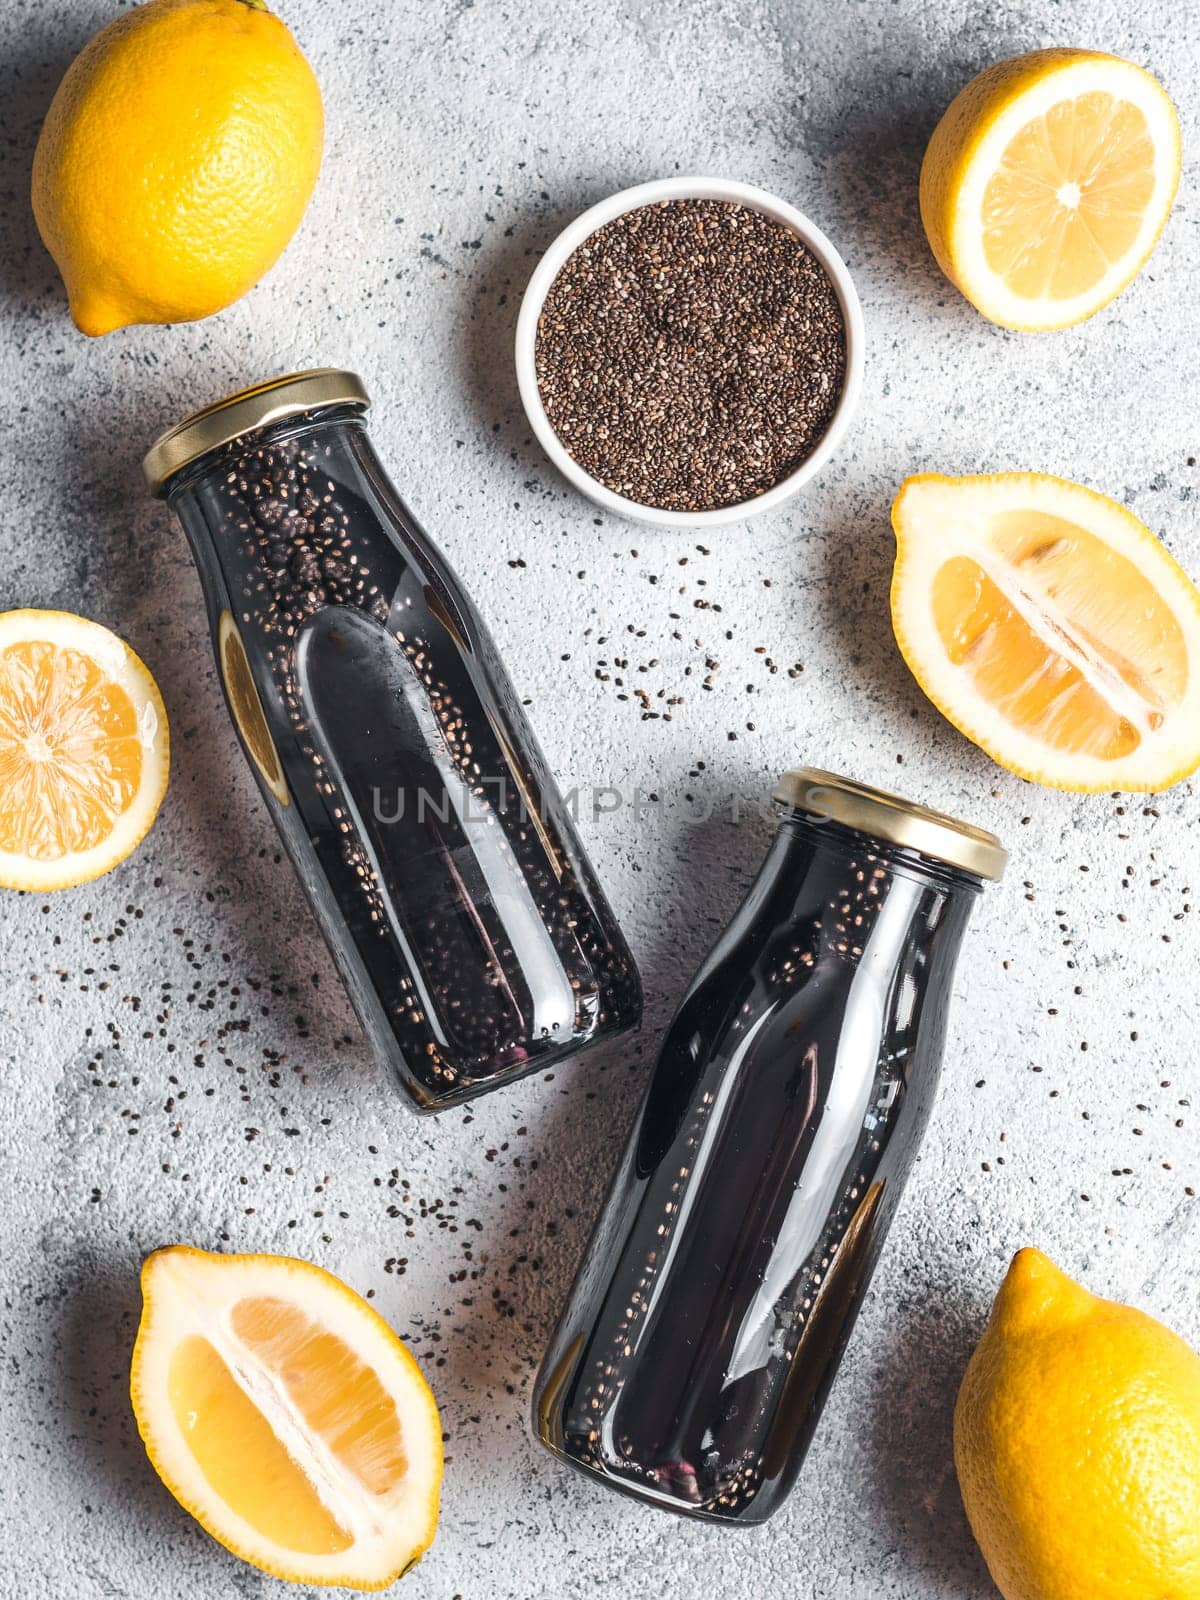 Detox activated charcoal black chia water or lemonade with lemon. Two bottle with black chia infused water. Detox drink idea and recipe. Vegan food and drink. Top view. Vertical.